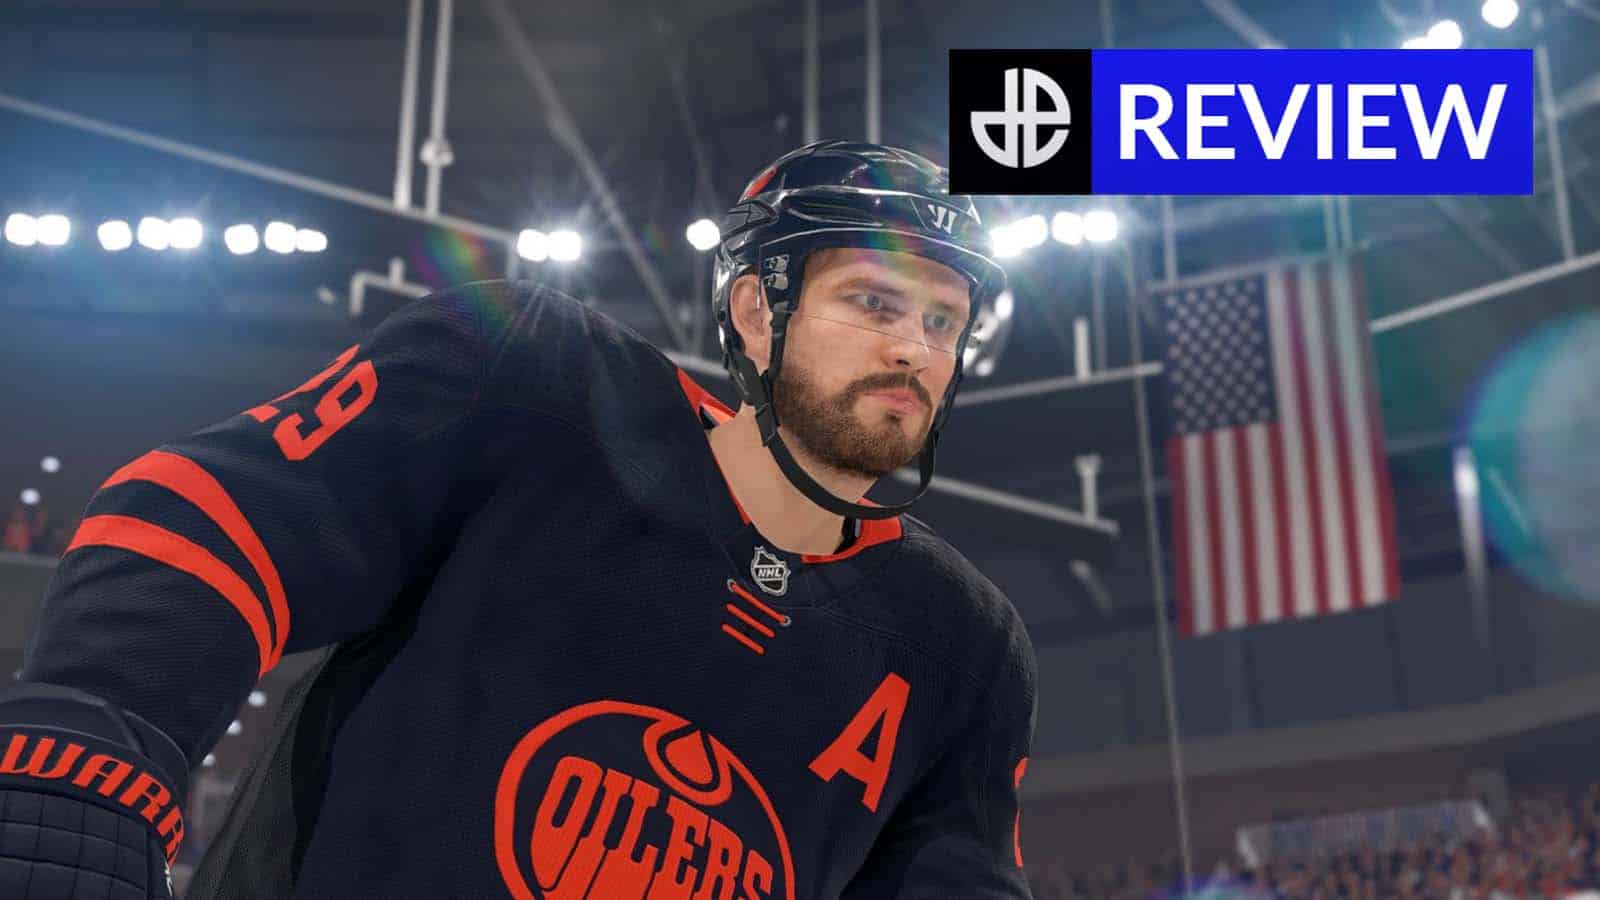 NHL 22 review header showing a player in front of the American flag